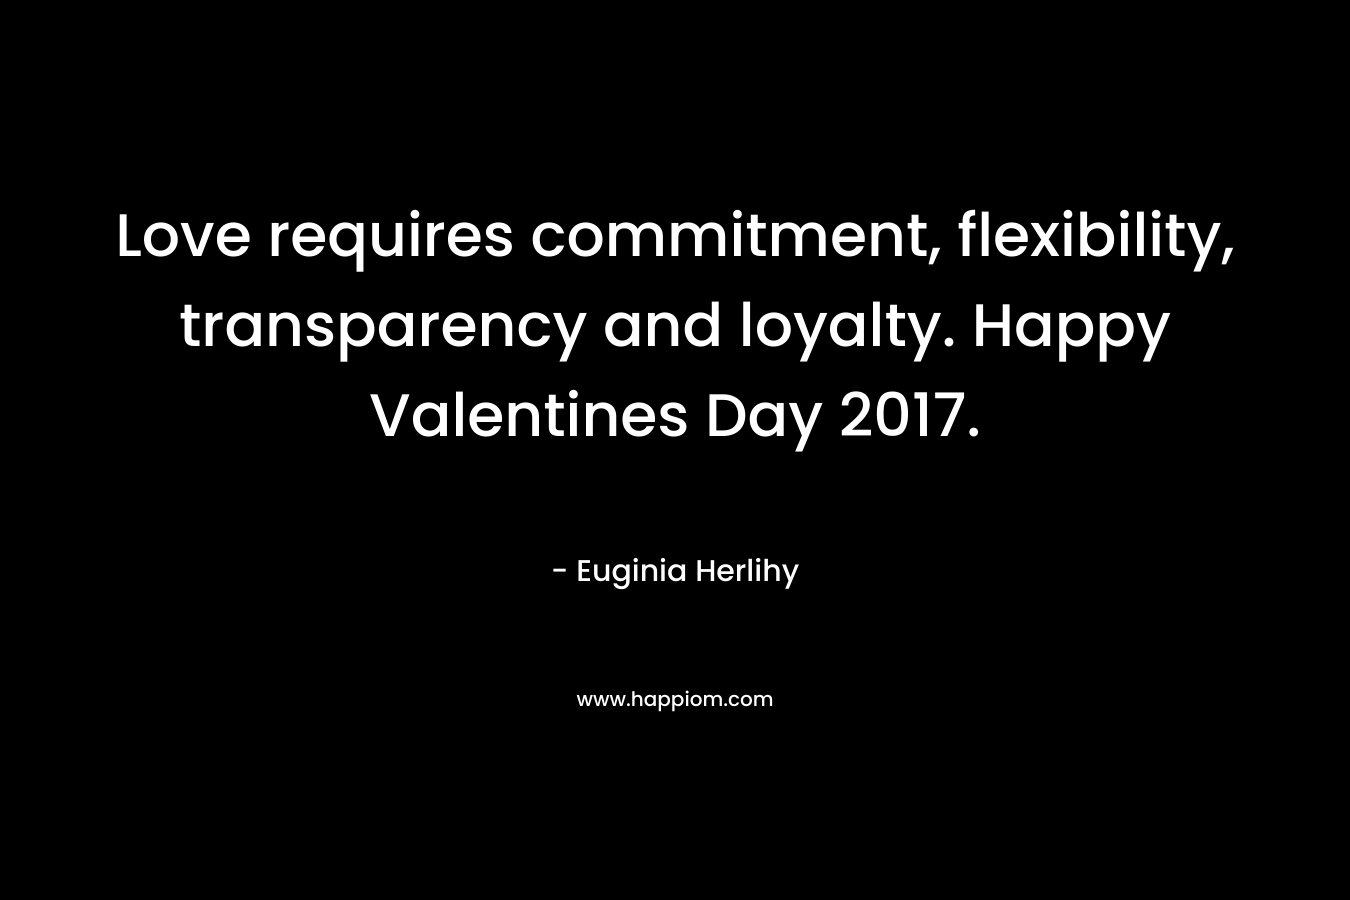 Love requires commitment, flexibility, transparency and loyalty. Happy Valentines Day 2017.